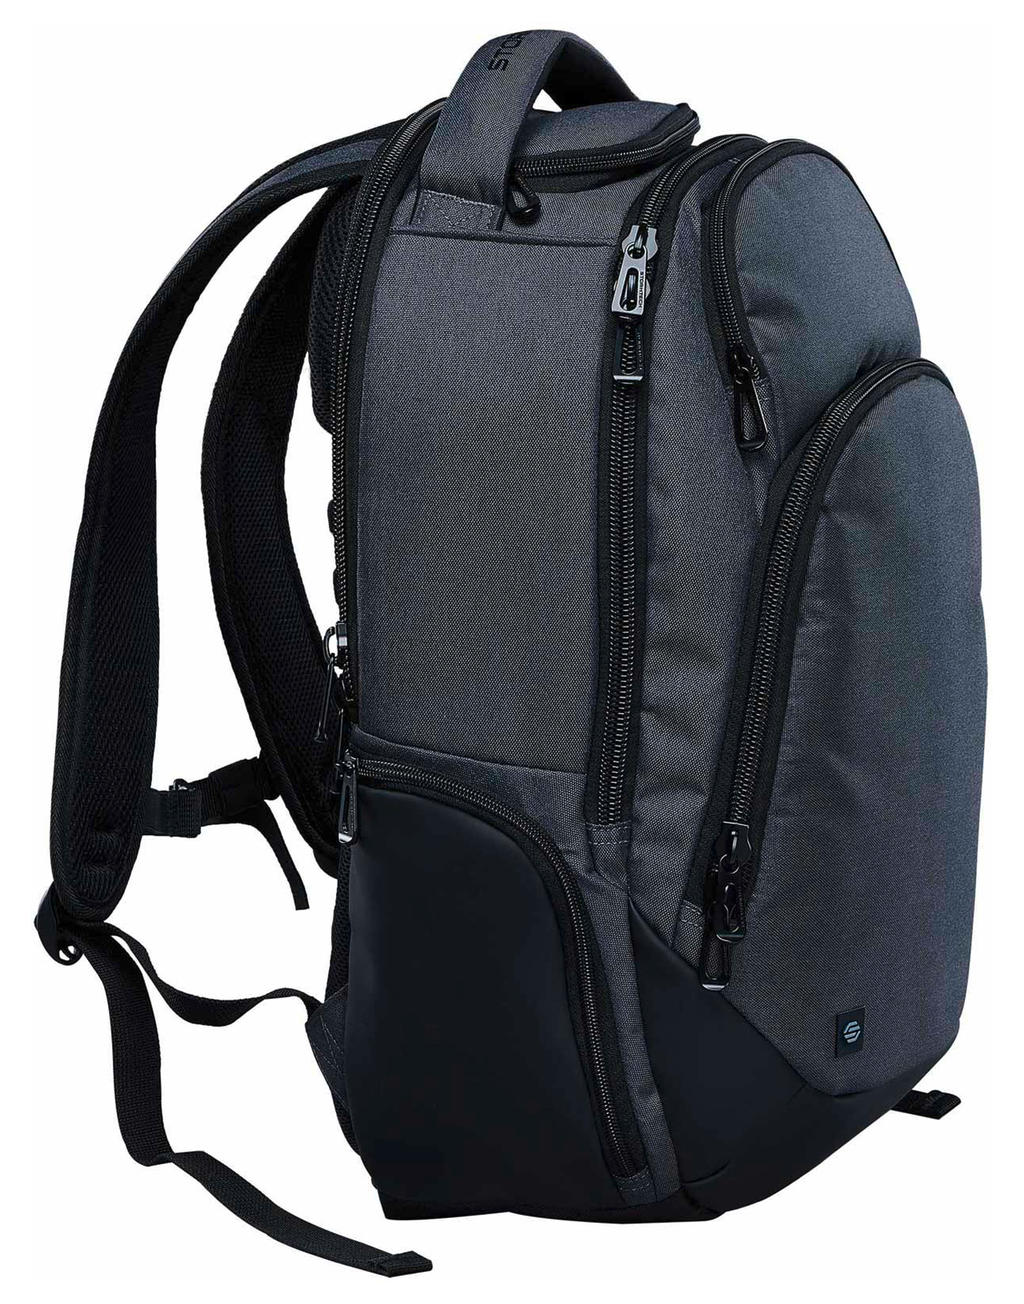  Madison Commuter Pack in Farbe Carbon